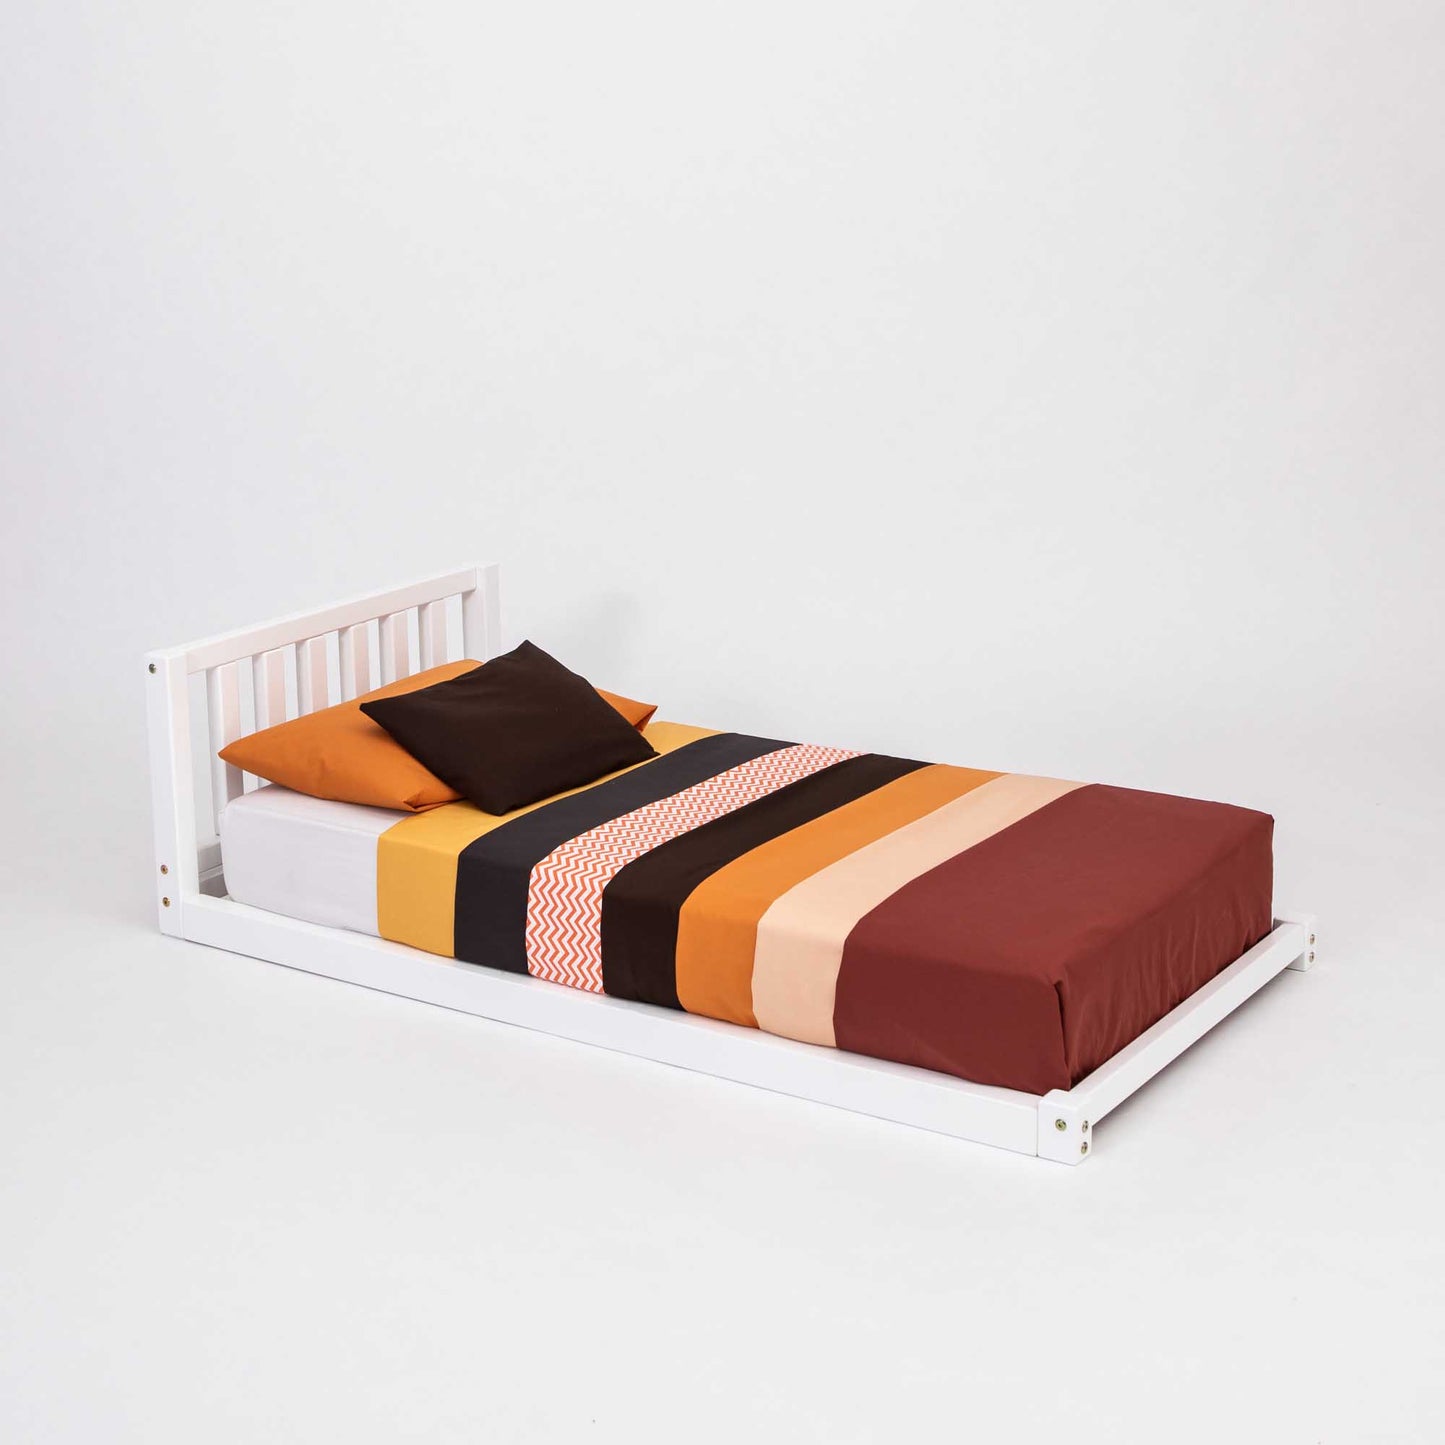 A Sweet Home From Wood striped toddler bed with a headboard.